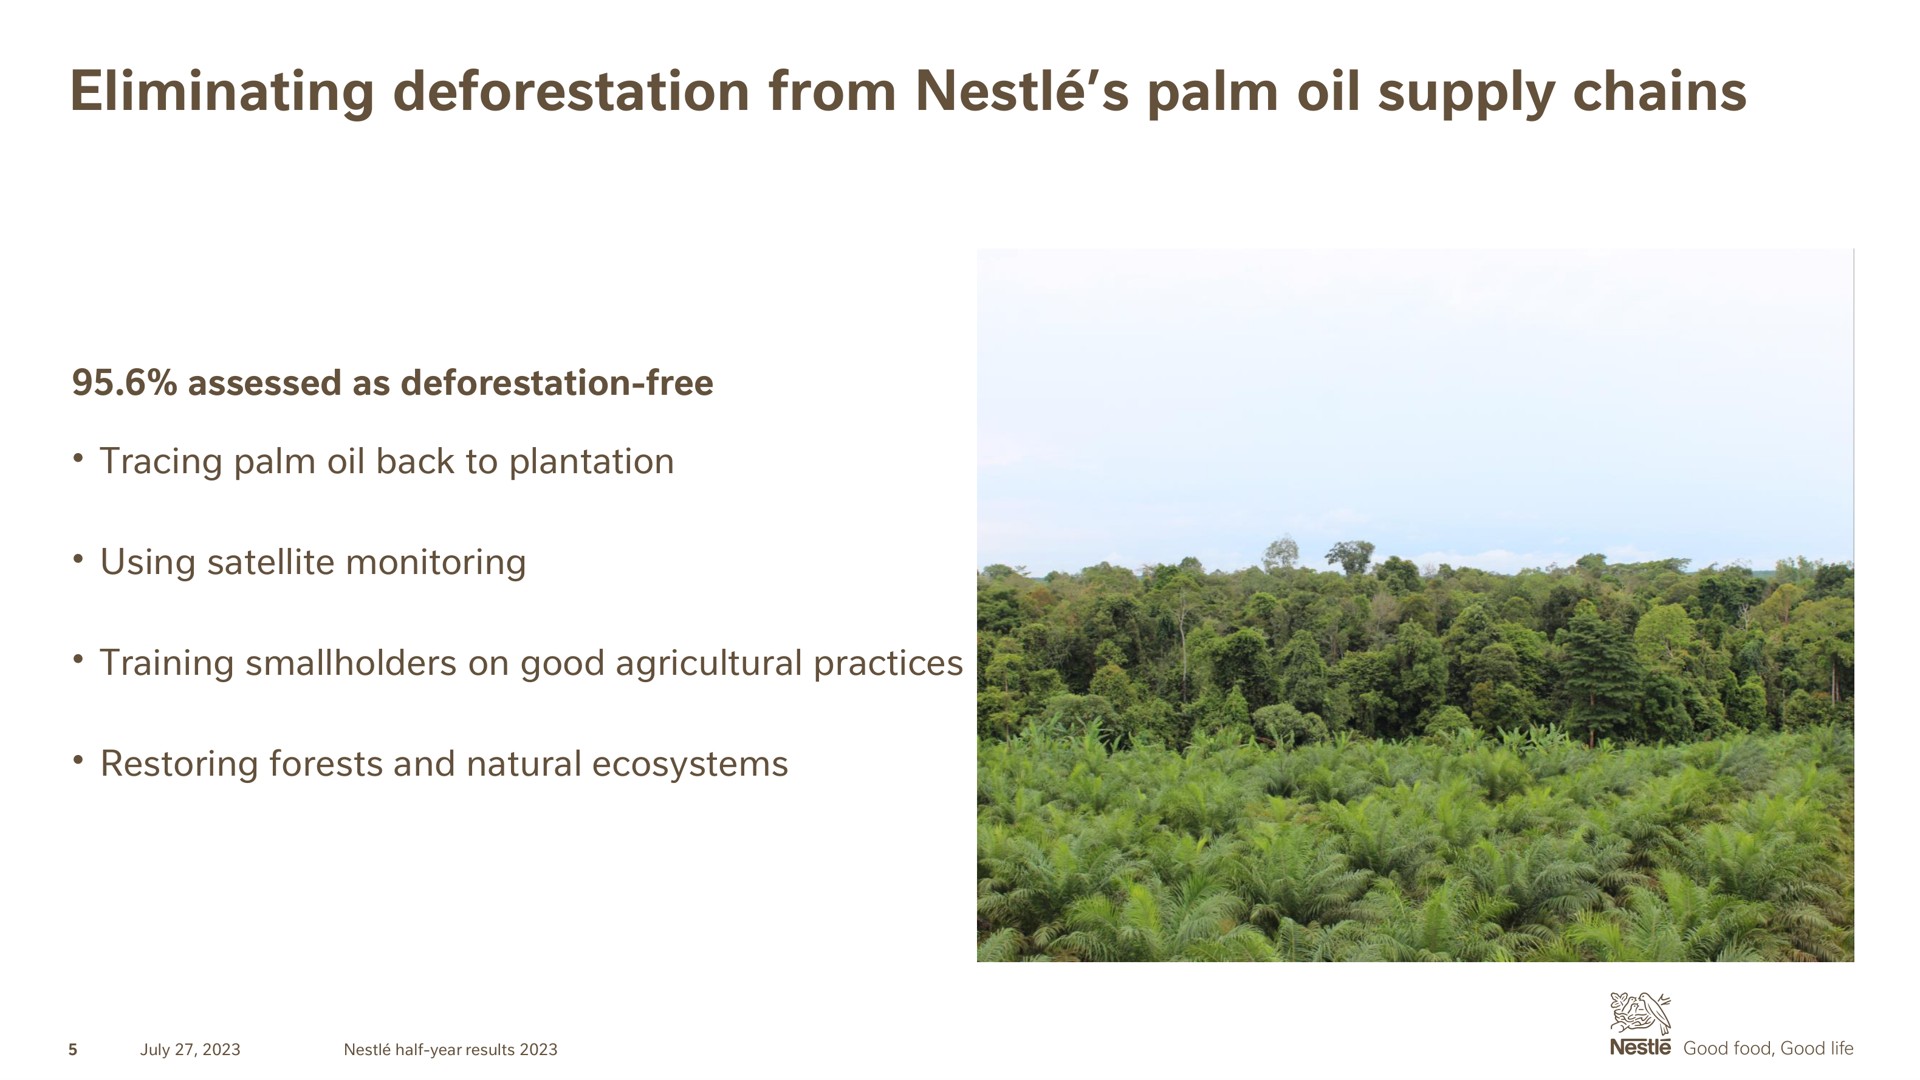 eliminating deforestation from palm oil supply chains | Nestle